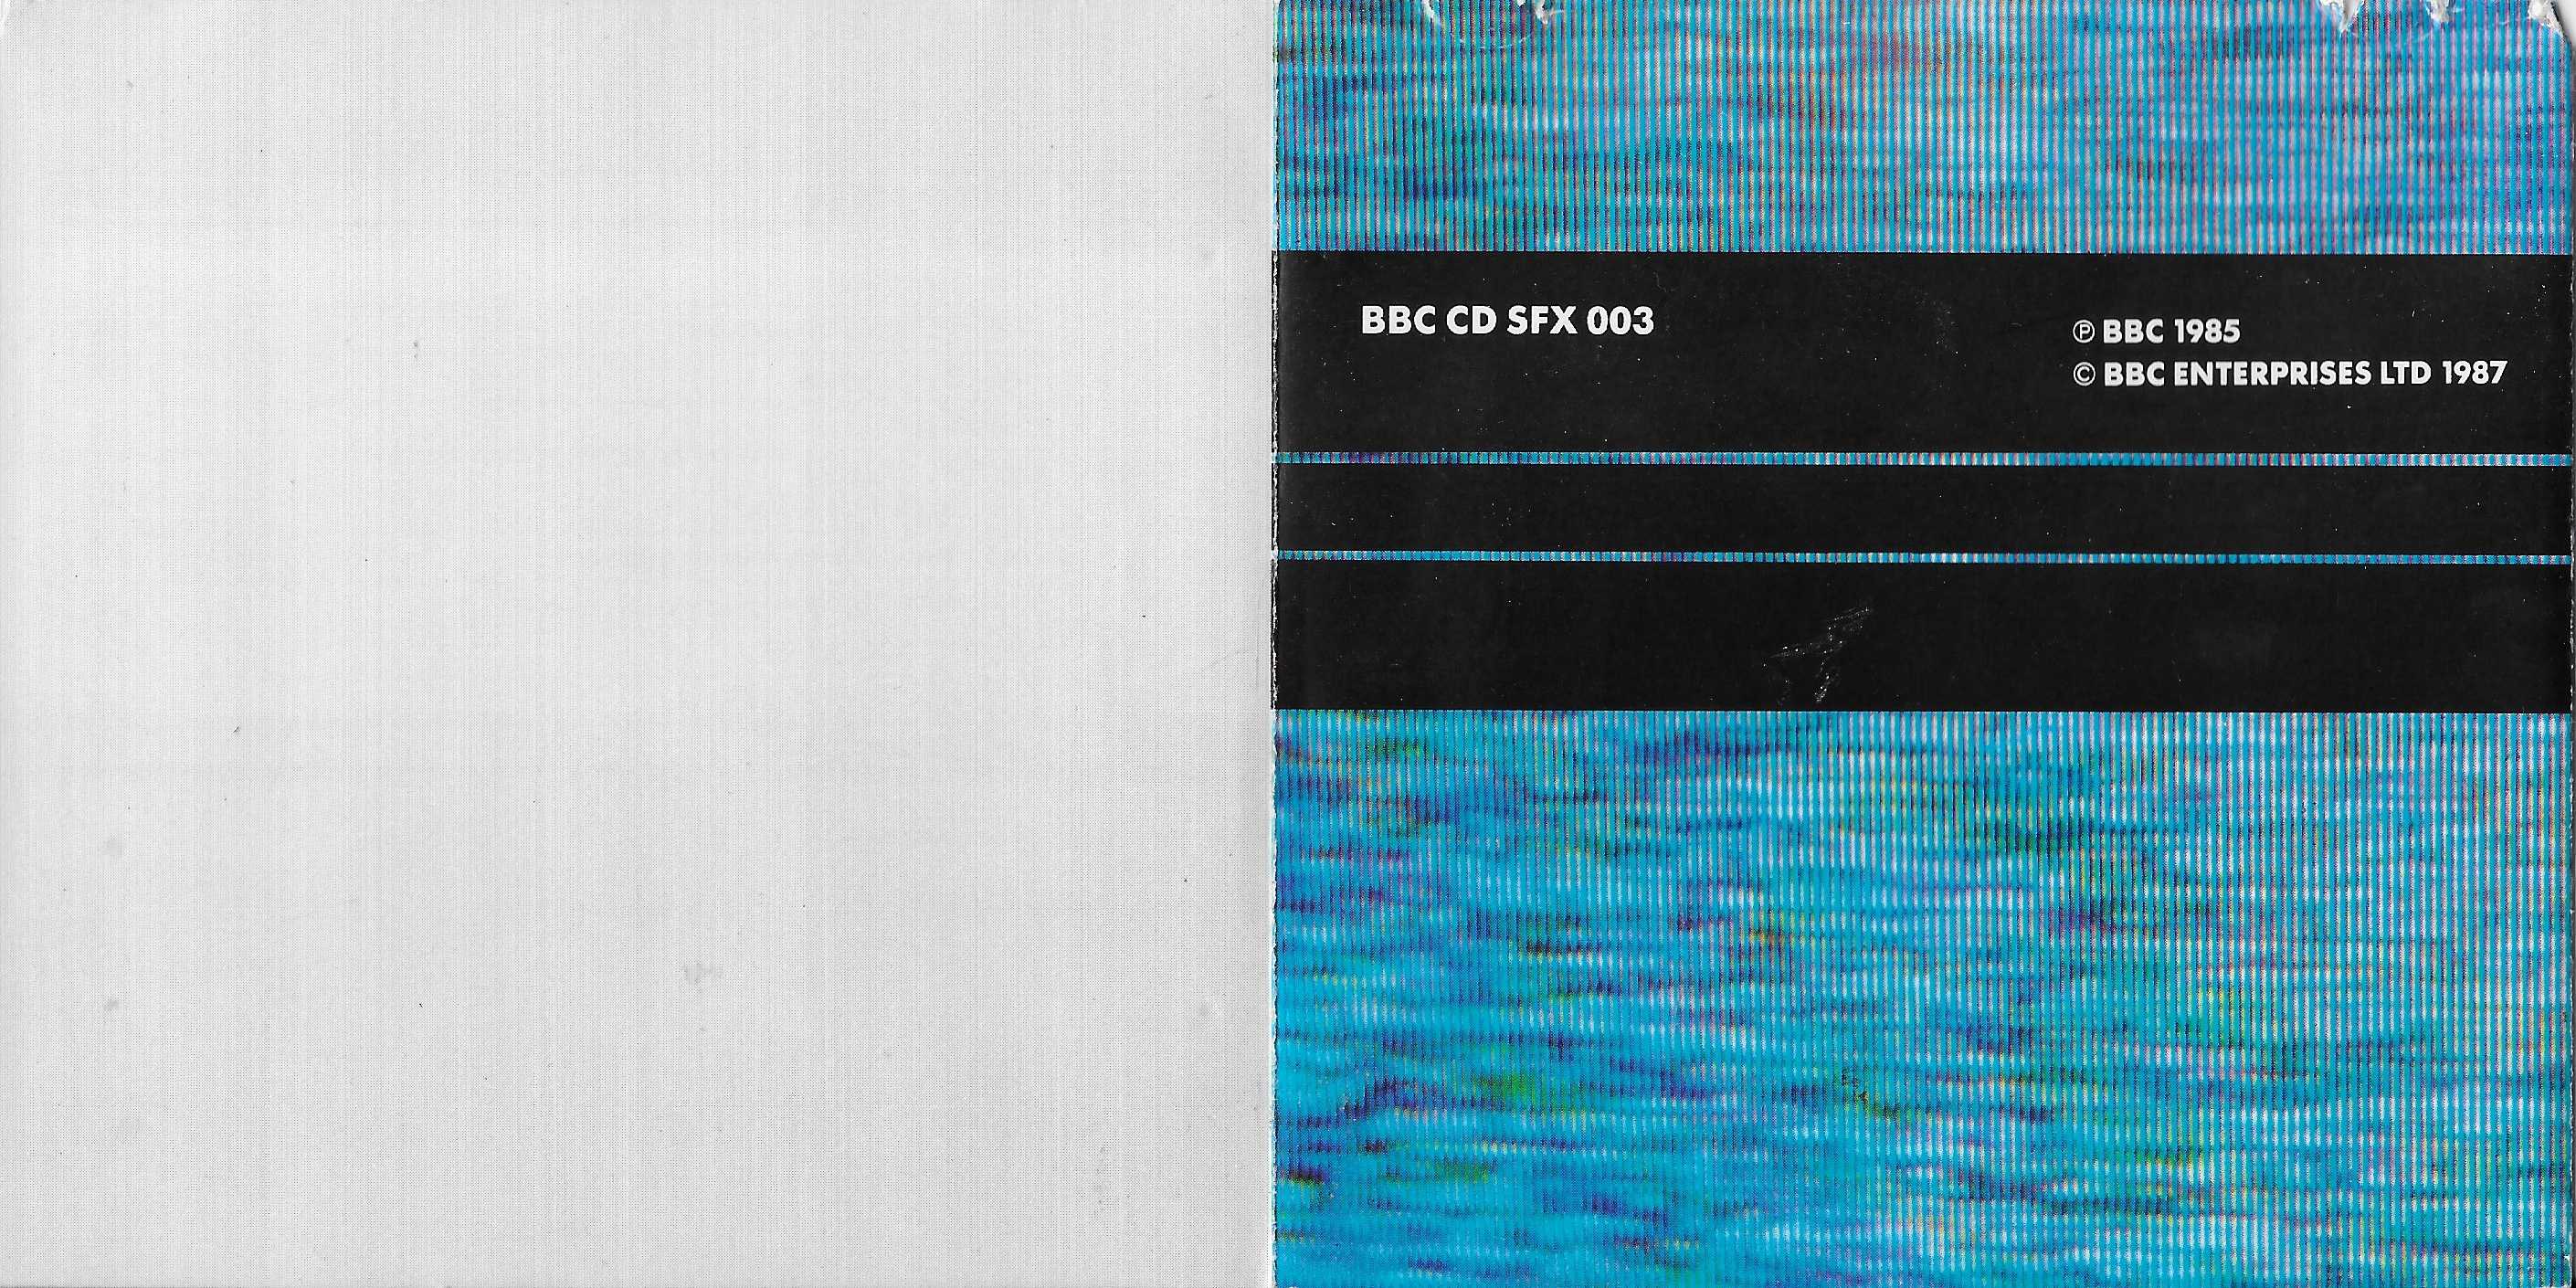 Middle of cover of BBCCD SFX003